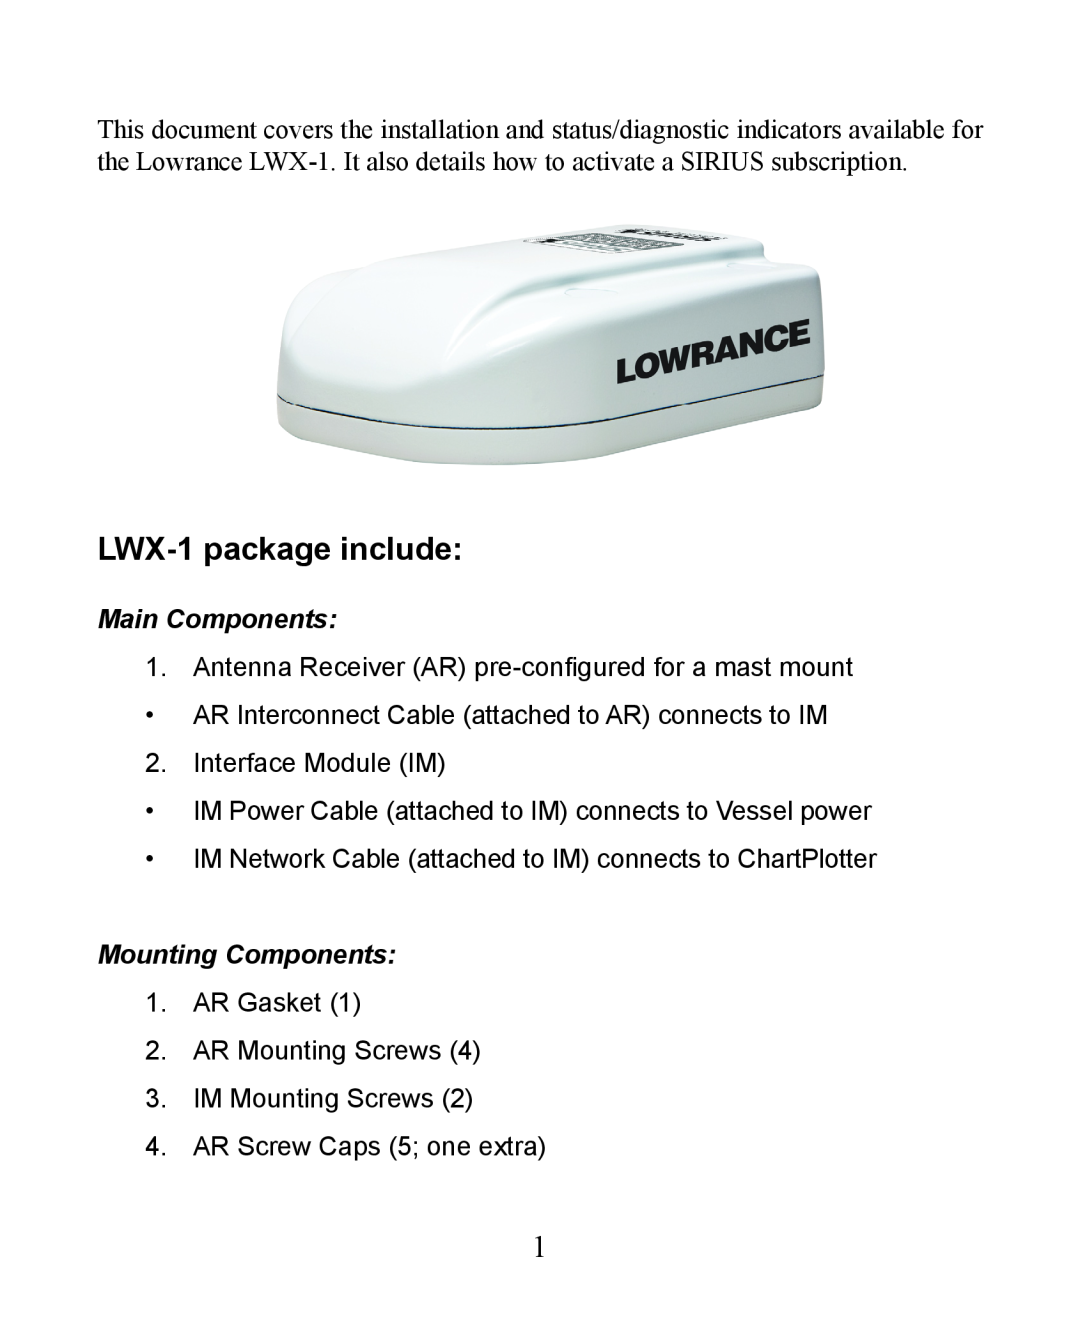 Lowrance electronic installation instructions LWX-1package include, Main Components, Mounting Components 